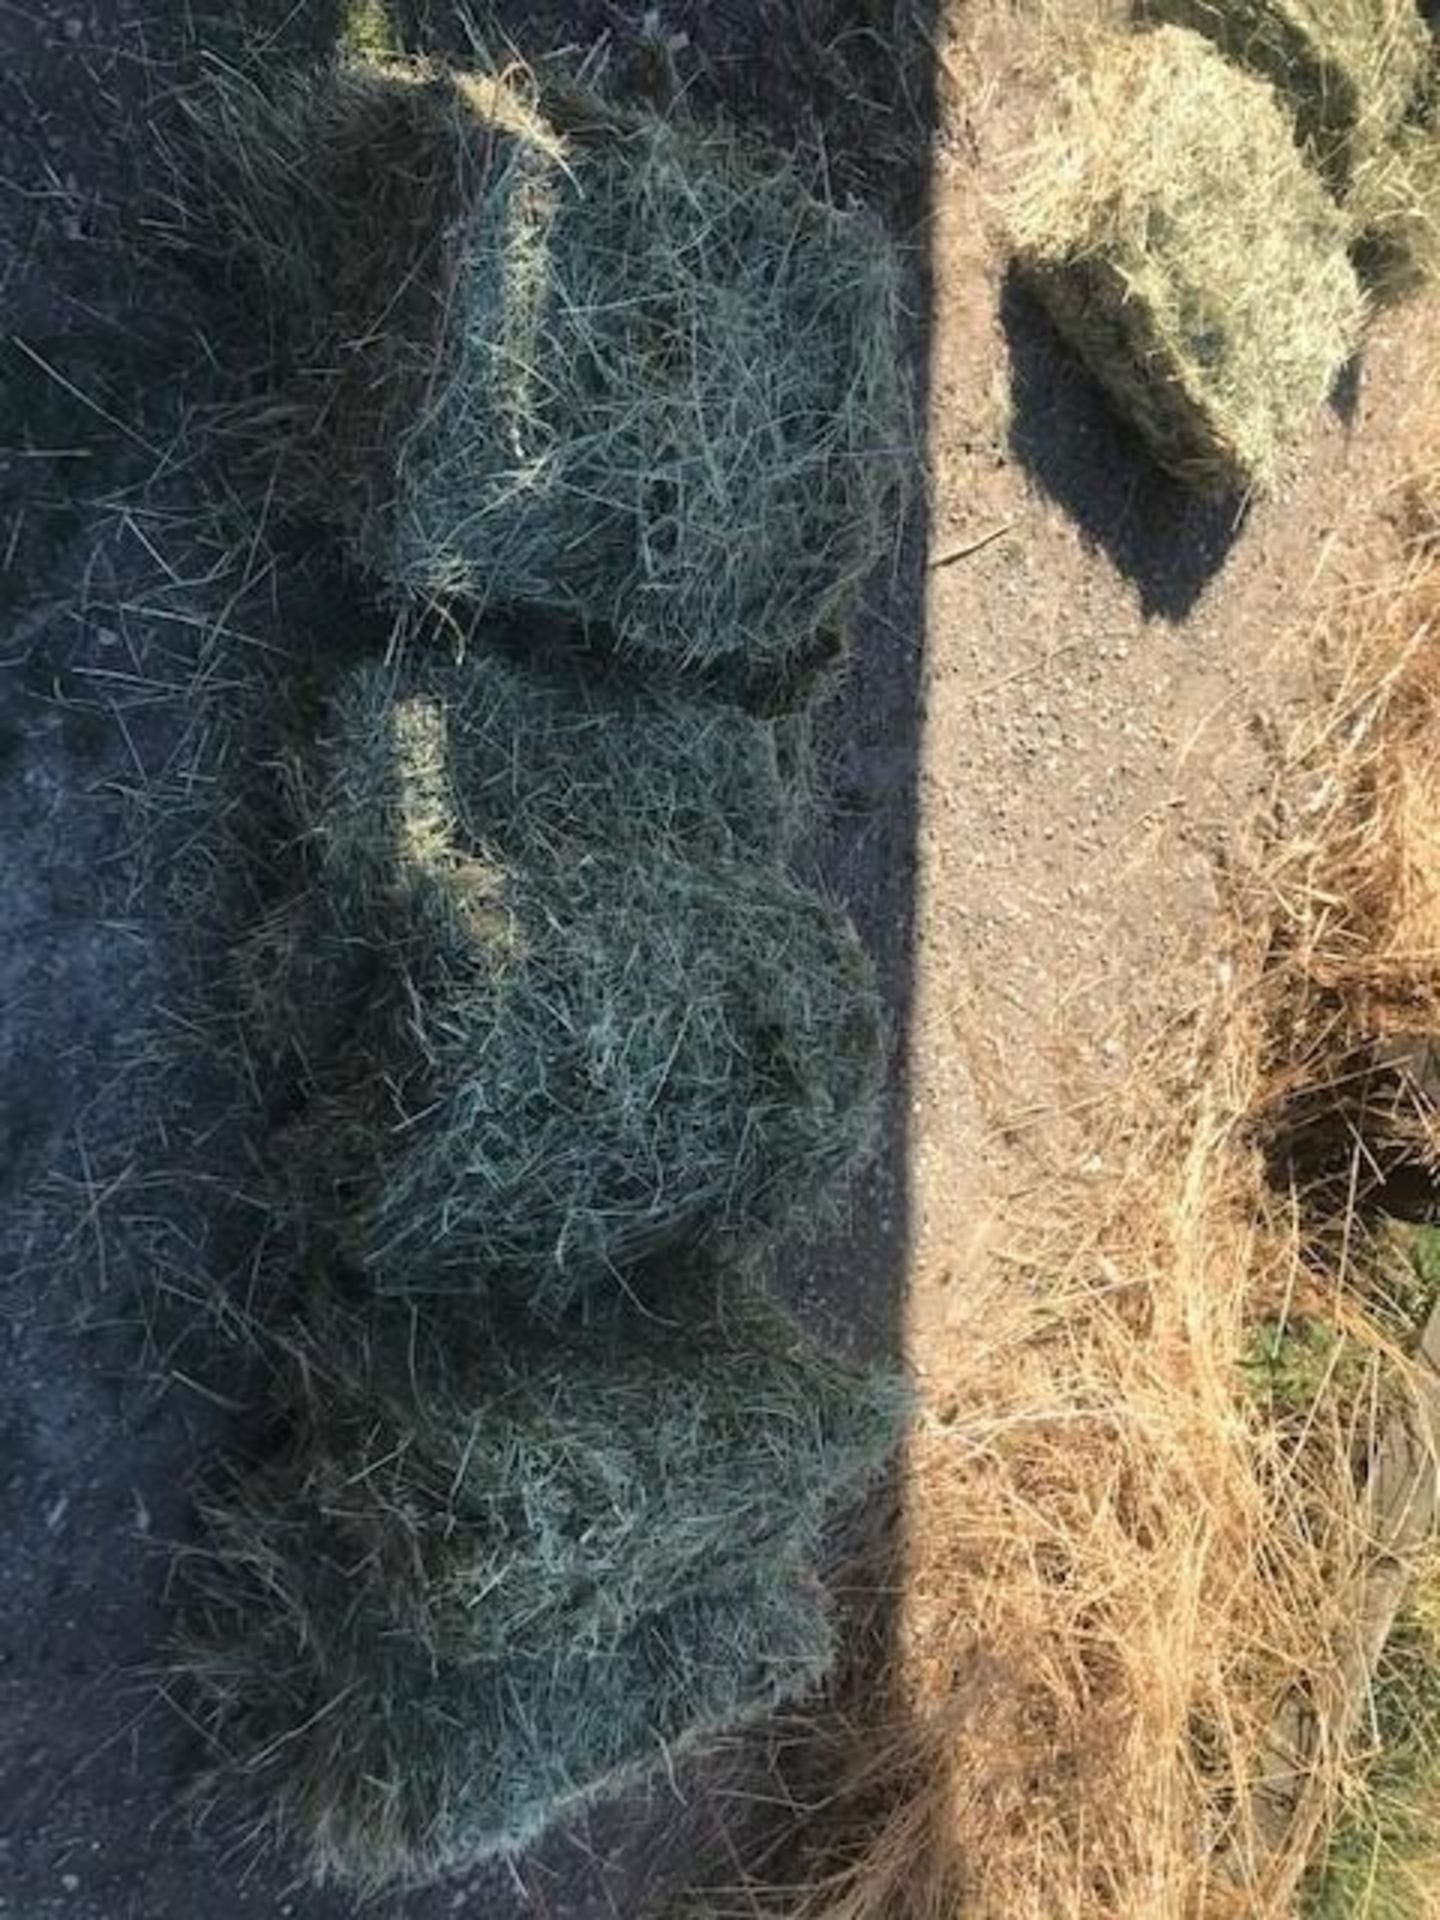 100 x 2021 Small Square Baled Hay - Image 2 of 3